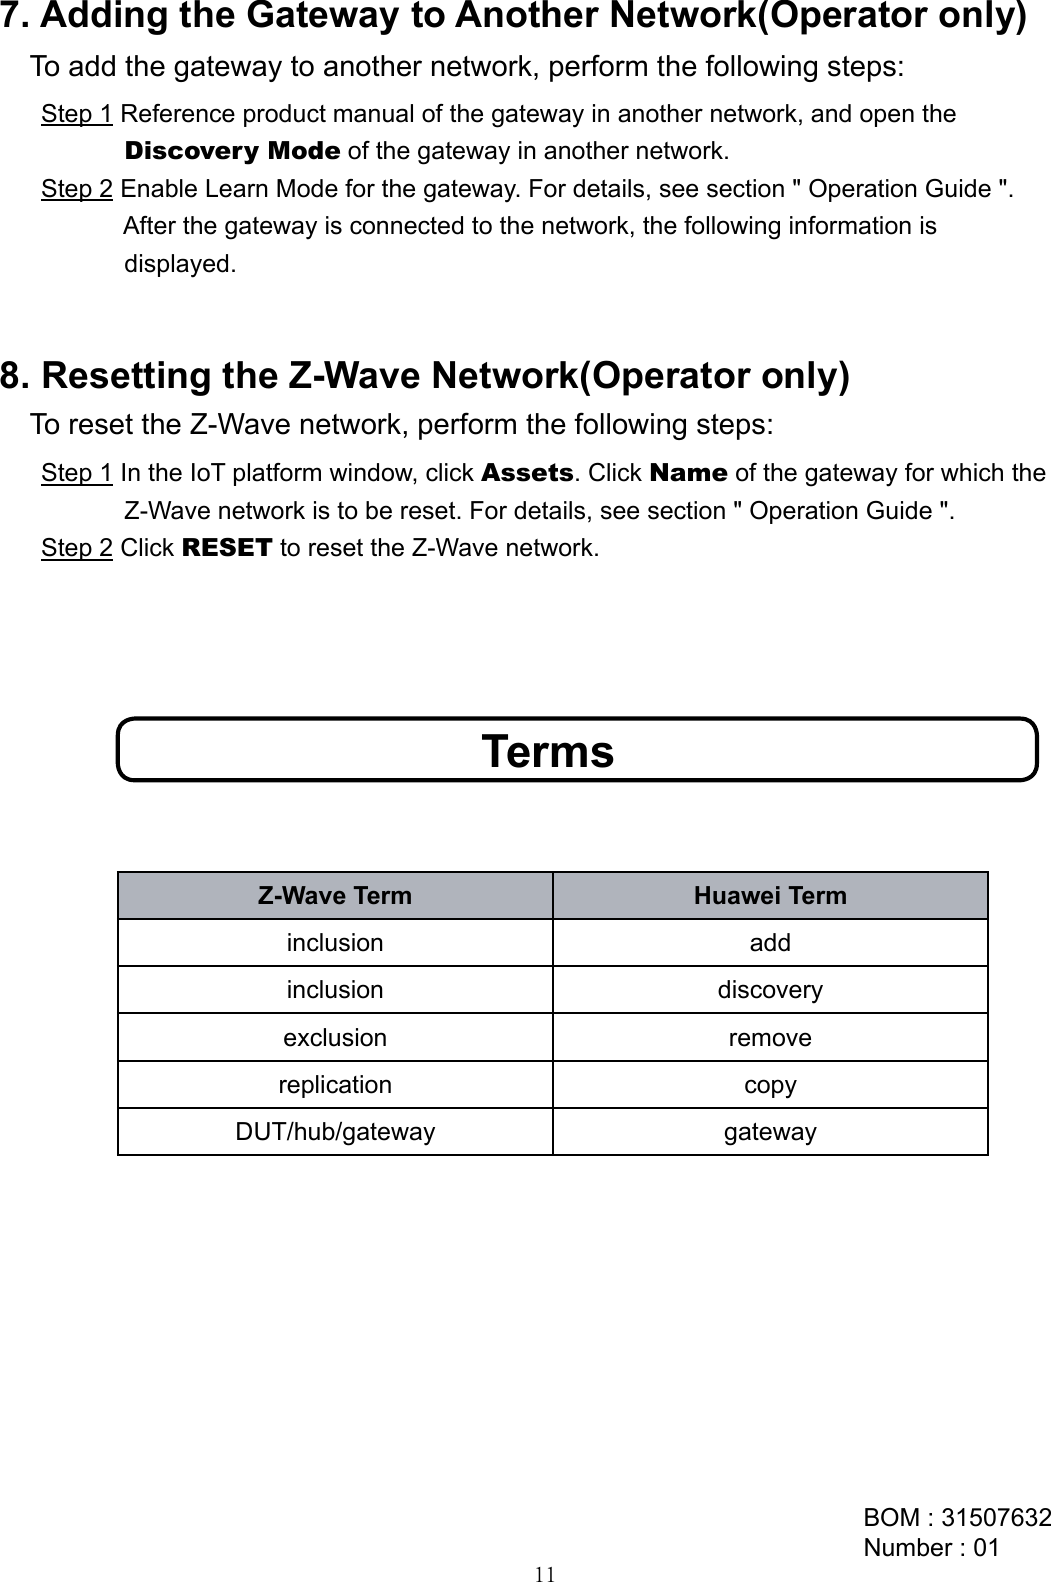 To reset the Z-Wave network, perform the following steps:8. Resetting the Z-Wave Network(Operator only)Step 1 In the IoT platform window, click Assets. Click Name of the gateway for which the             Z-Wave network is to be reset. For details, see section &quot; Operation Guide &quot;. Step 2 Click RESET to reset the Z-Wave network.To add the gateway to another network, perform the following steps:Step 1 Reference product manual of the gateway in another network, and open the             Discovery Mode of the gateway in another network.Step 2 Enable Learn Mode for the gateway. For details, see section &quot; Operation Guide &quot;.             After the gateway is connected to the network, the following information is             displayed.7. Adding the Gateway to Another Network(Operator only)TermsZ-Wave Term Huawei Terminclusion addinclusion discoveryexclusion removereplication copyDUT/hub/gateway gatewayBOM : 31507632Number : 0111